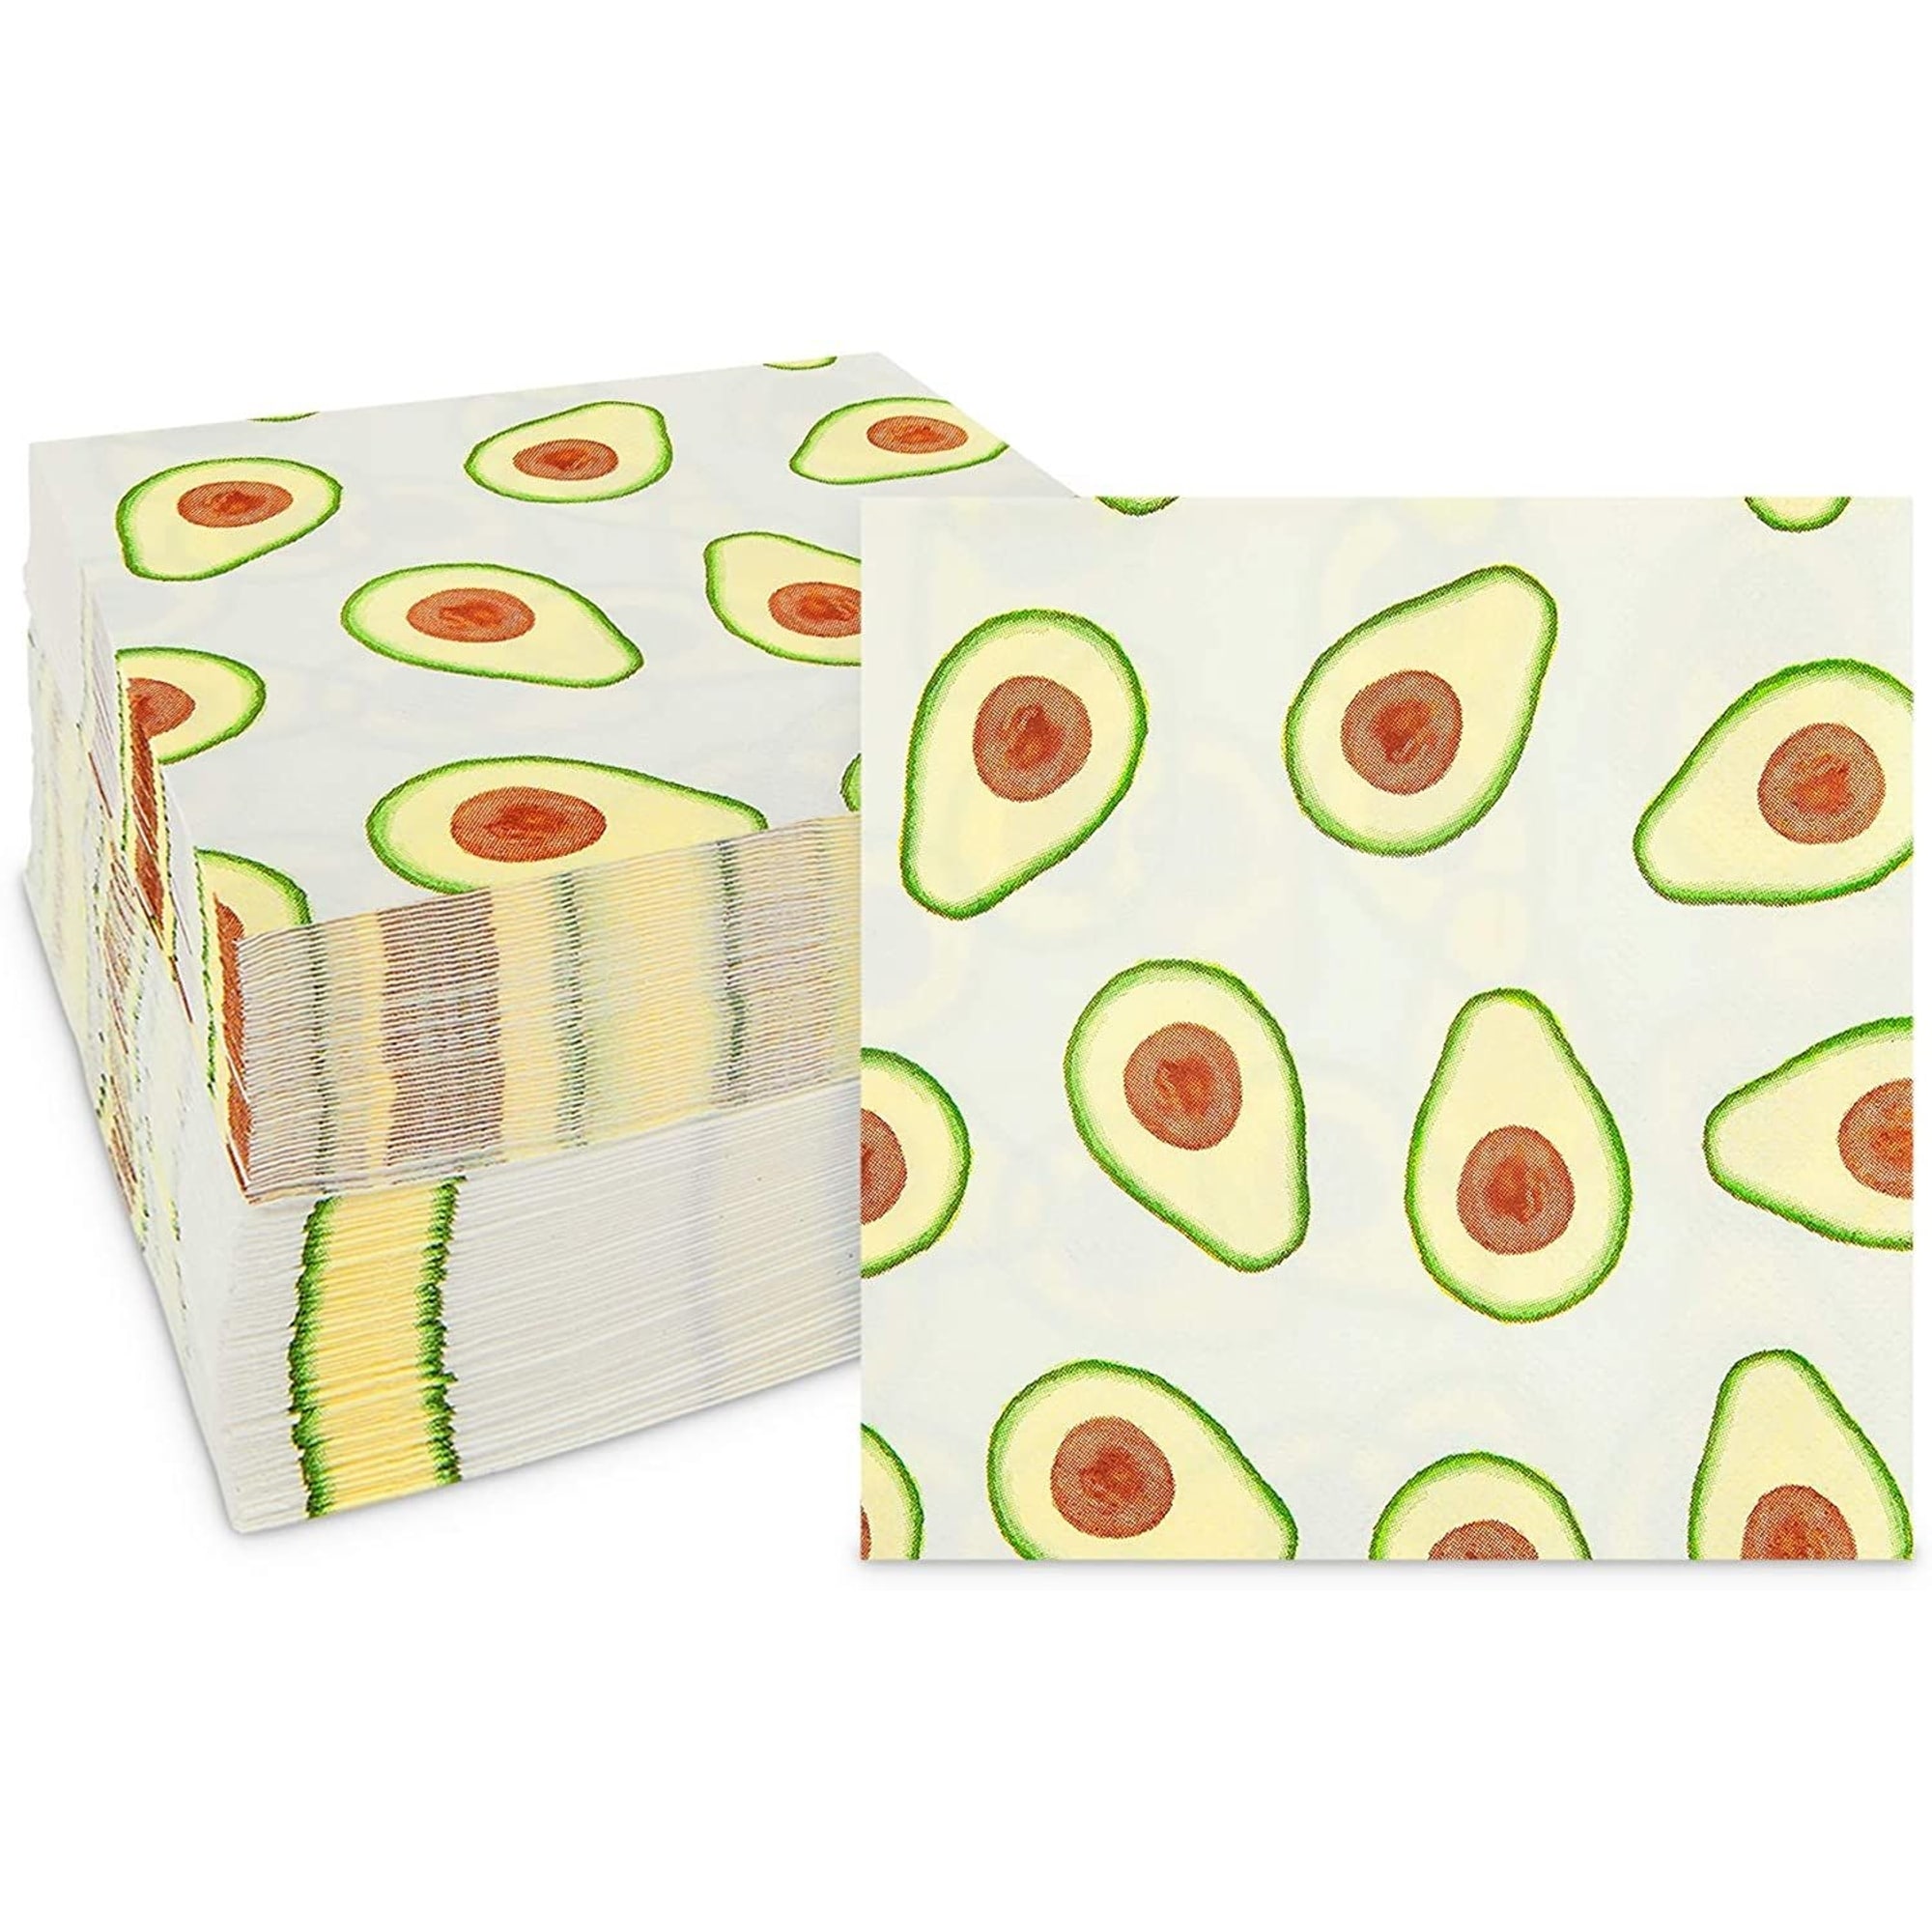 https://ak1.ostkcdn.com/images/products/is/images/direct/e1f7c5ce47d2f76b2fd84f0530b3ea1ffce51e57/Avocado-Napkins-for-Fiesta-Birthday-Party-%285-In%2C-100-Pack%29.jpg